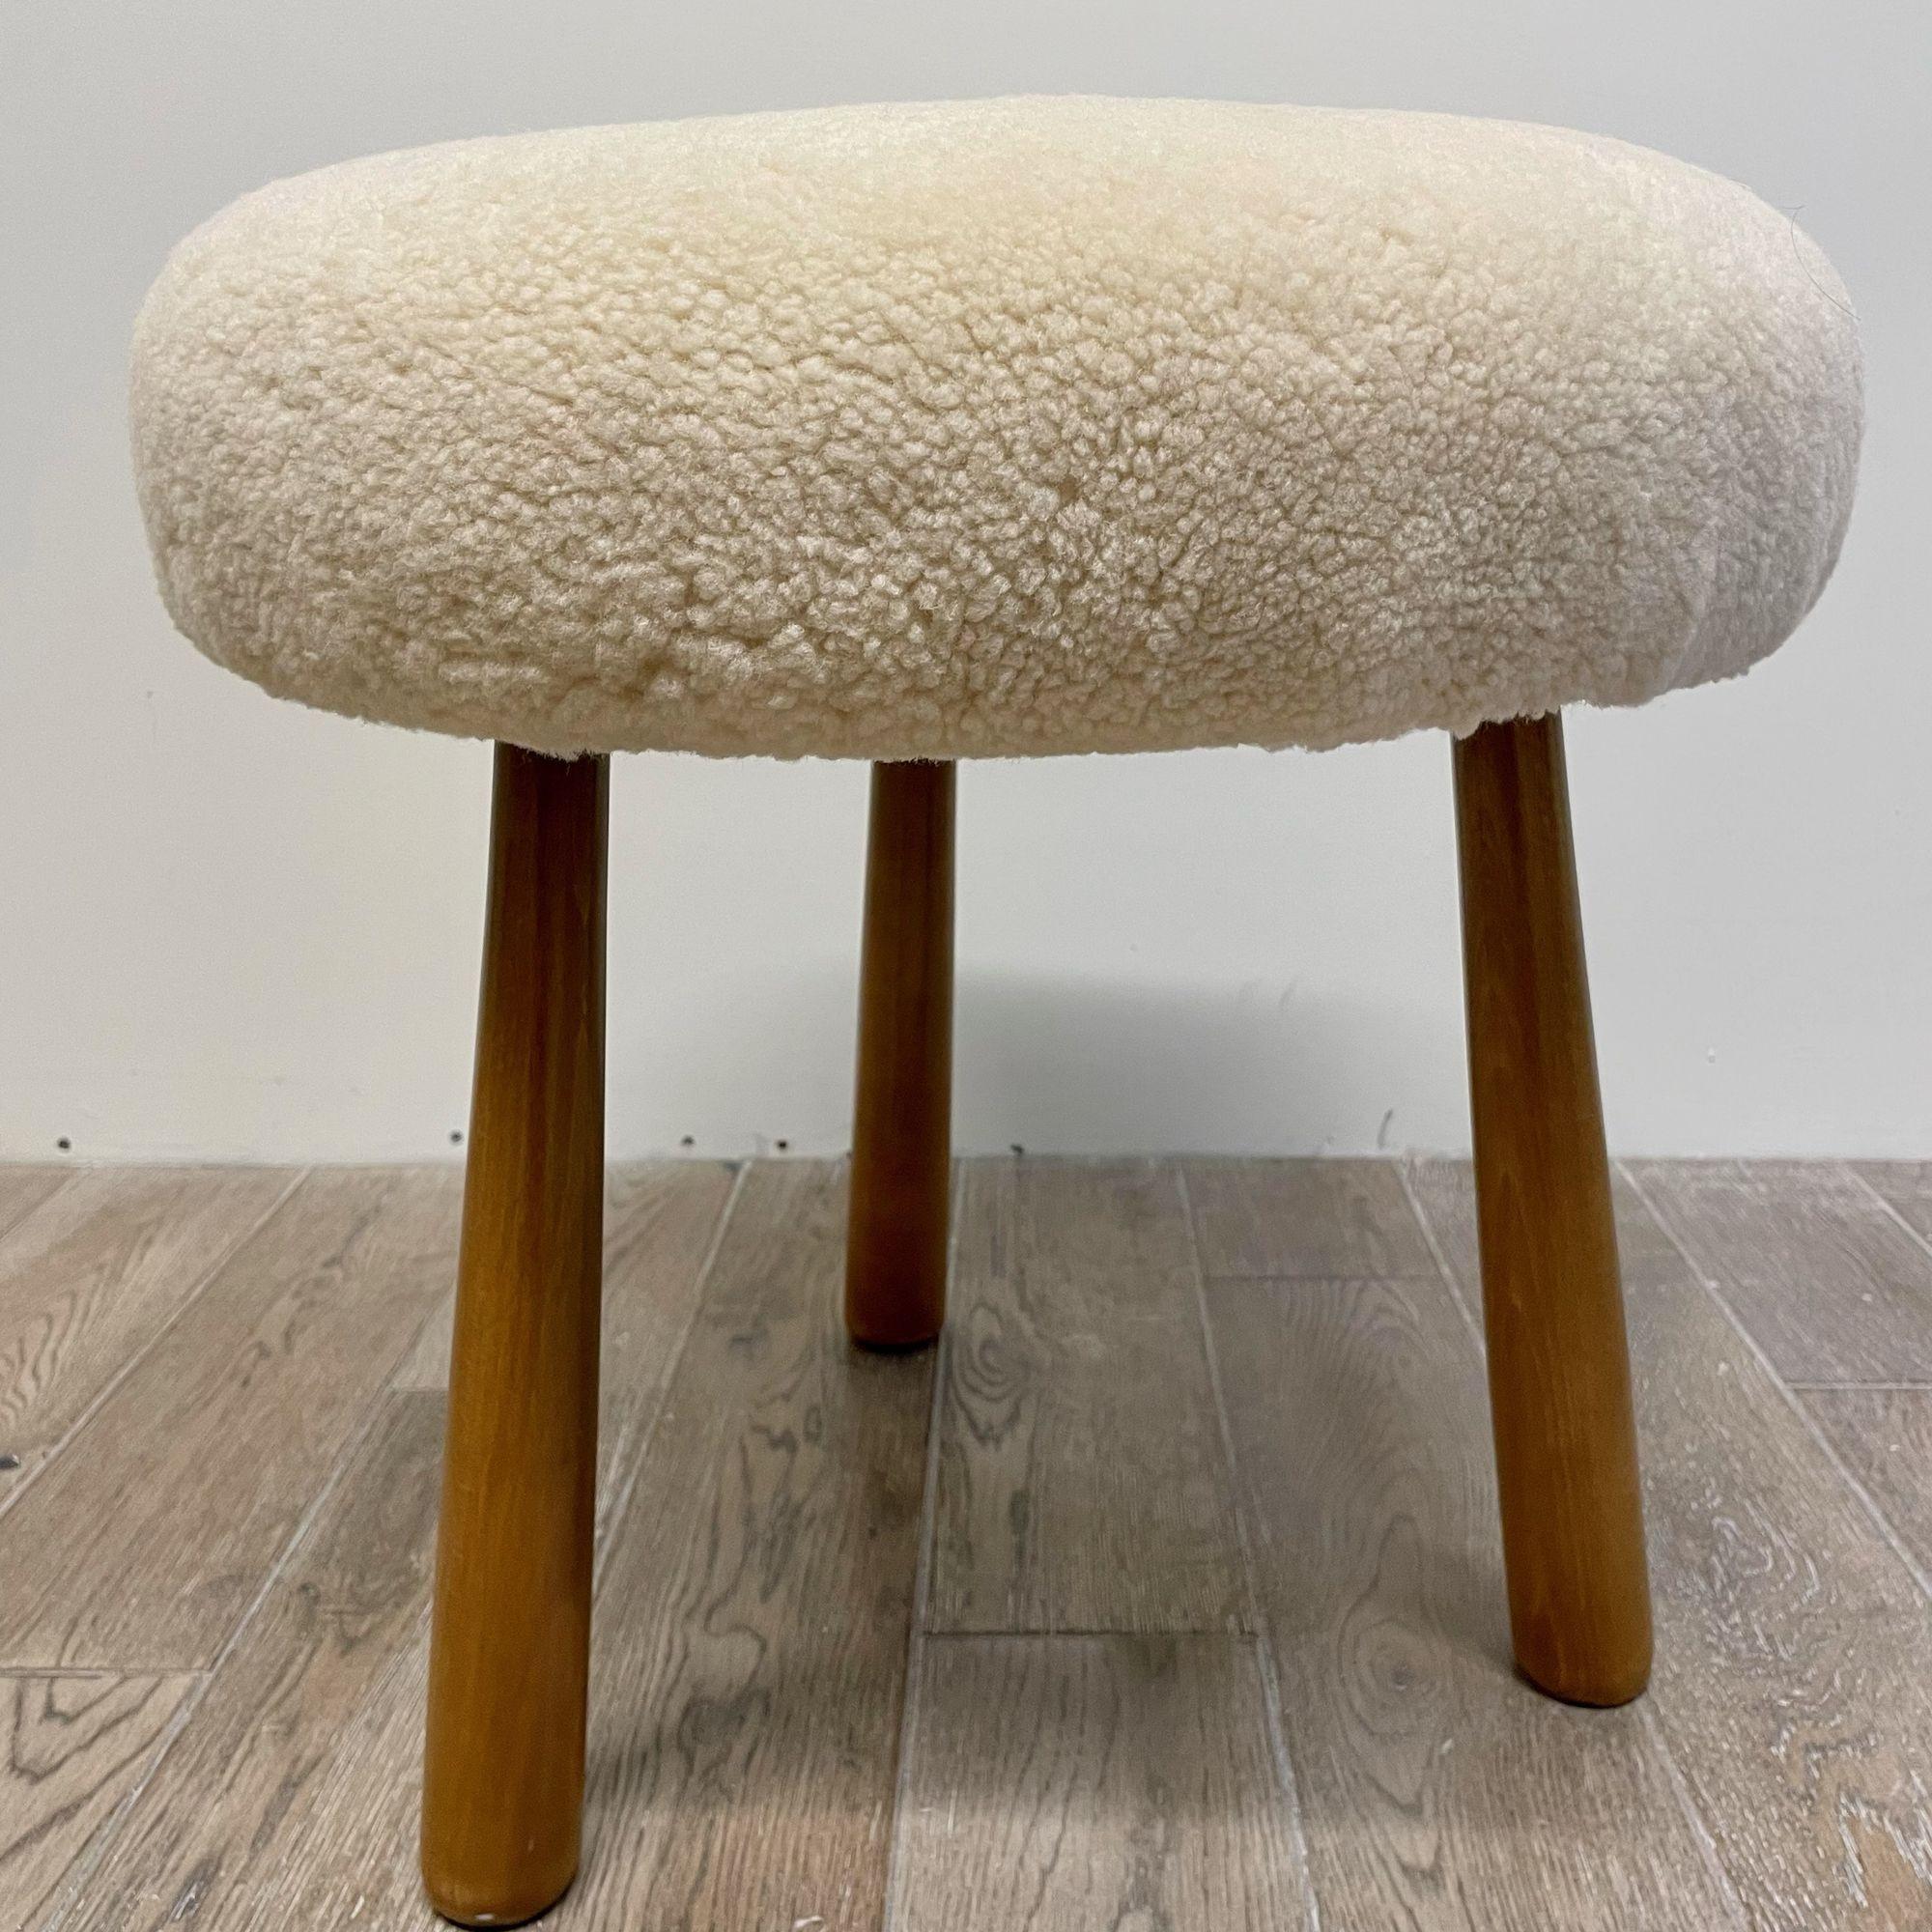 Contemporary Swedish Modern Style Sheepskin Footstool / Ottoman, Beige
Contemporary organic form tri-pod stool or ottoman. New comfortable foam cushioning and beige genuine shearling. Overall form and design inspired by Nordic design / Swedish